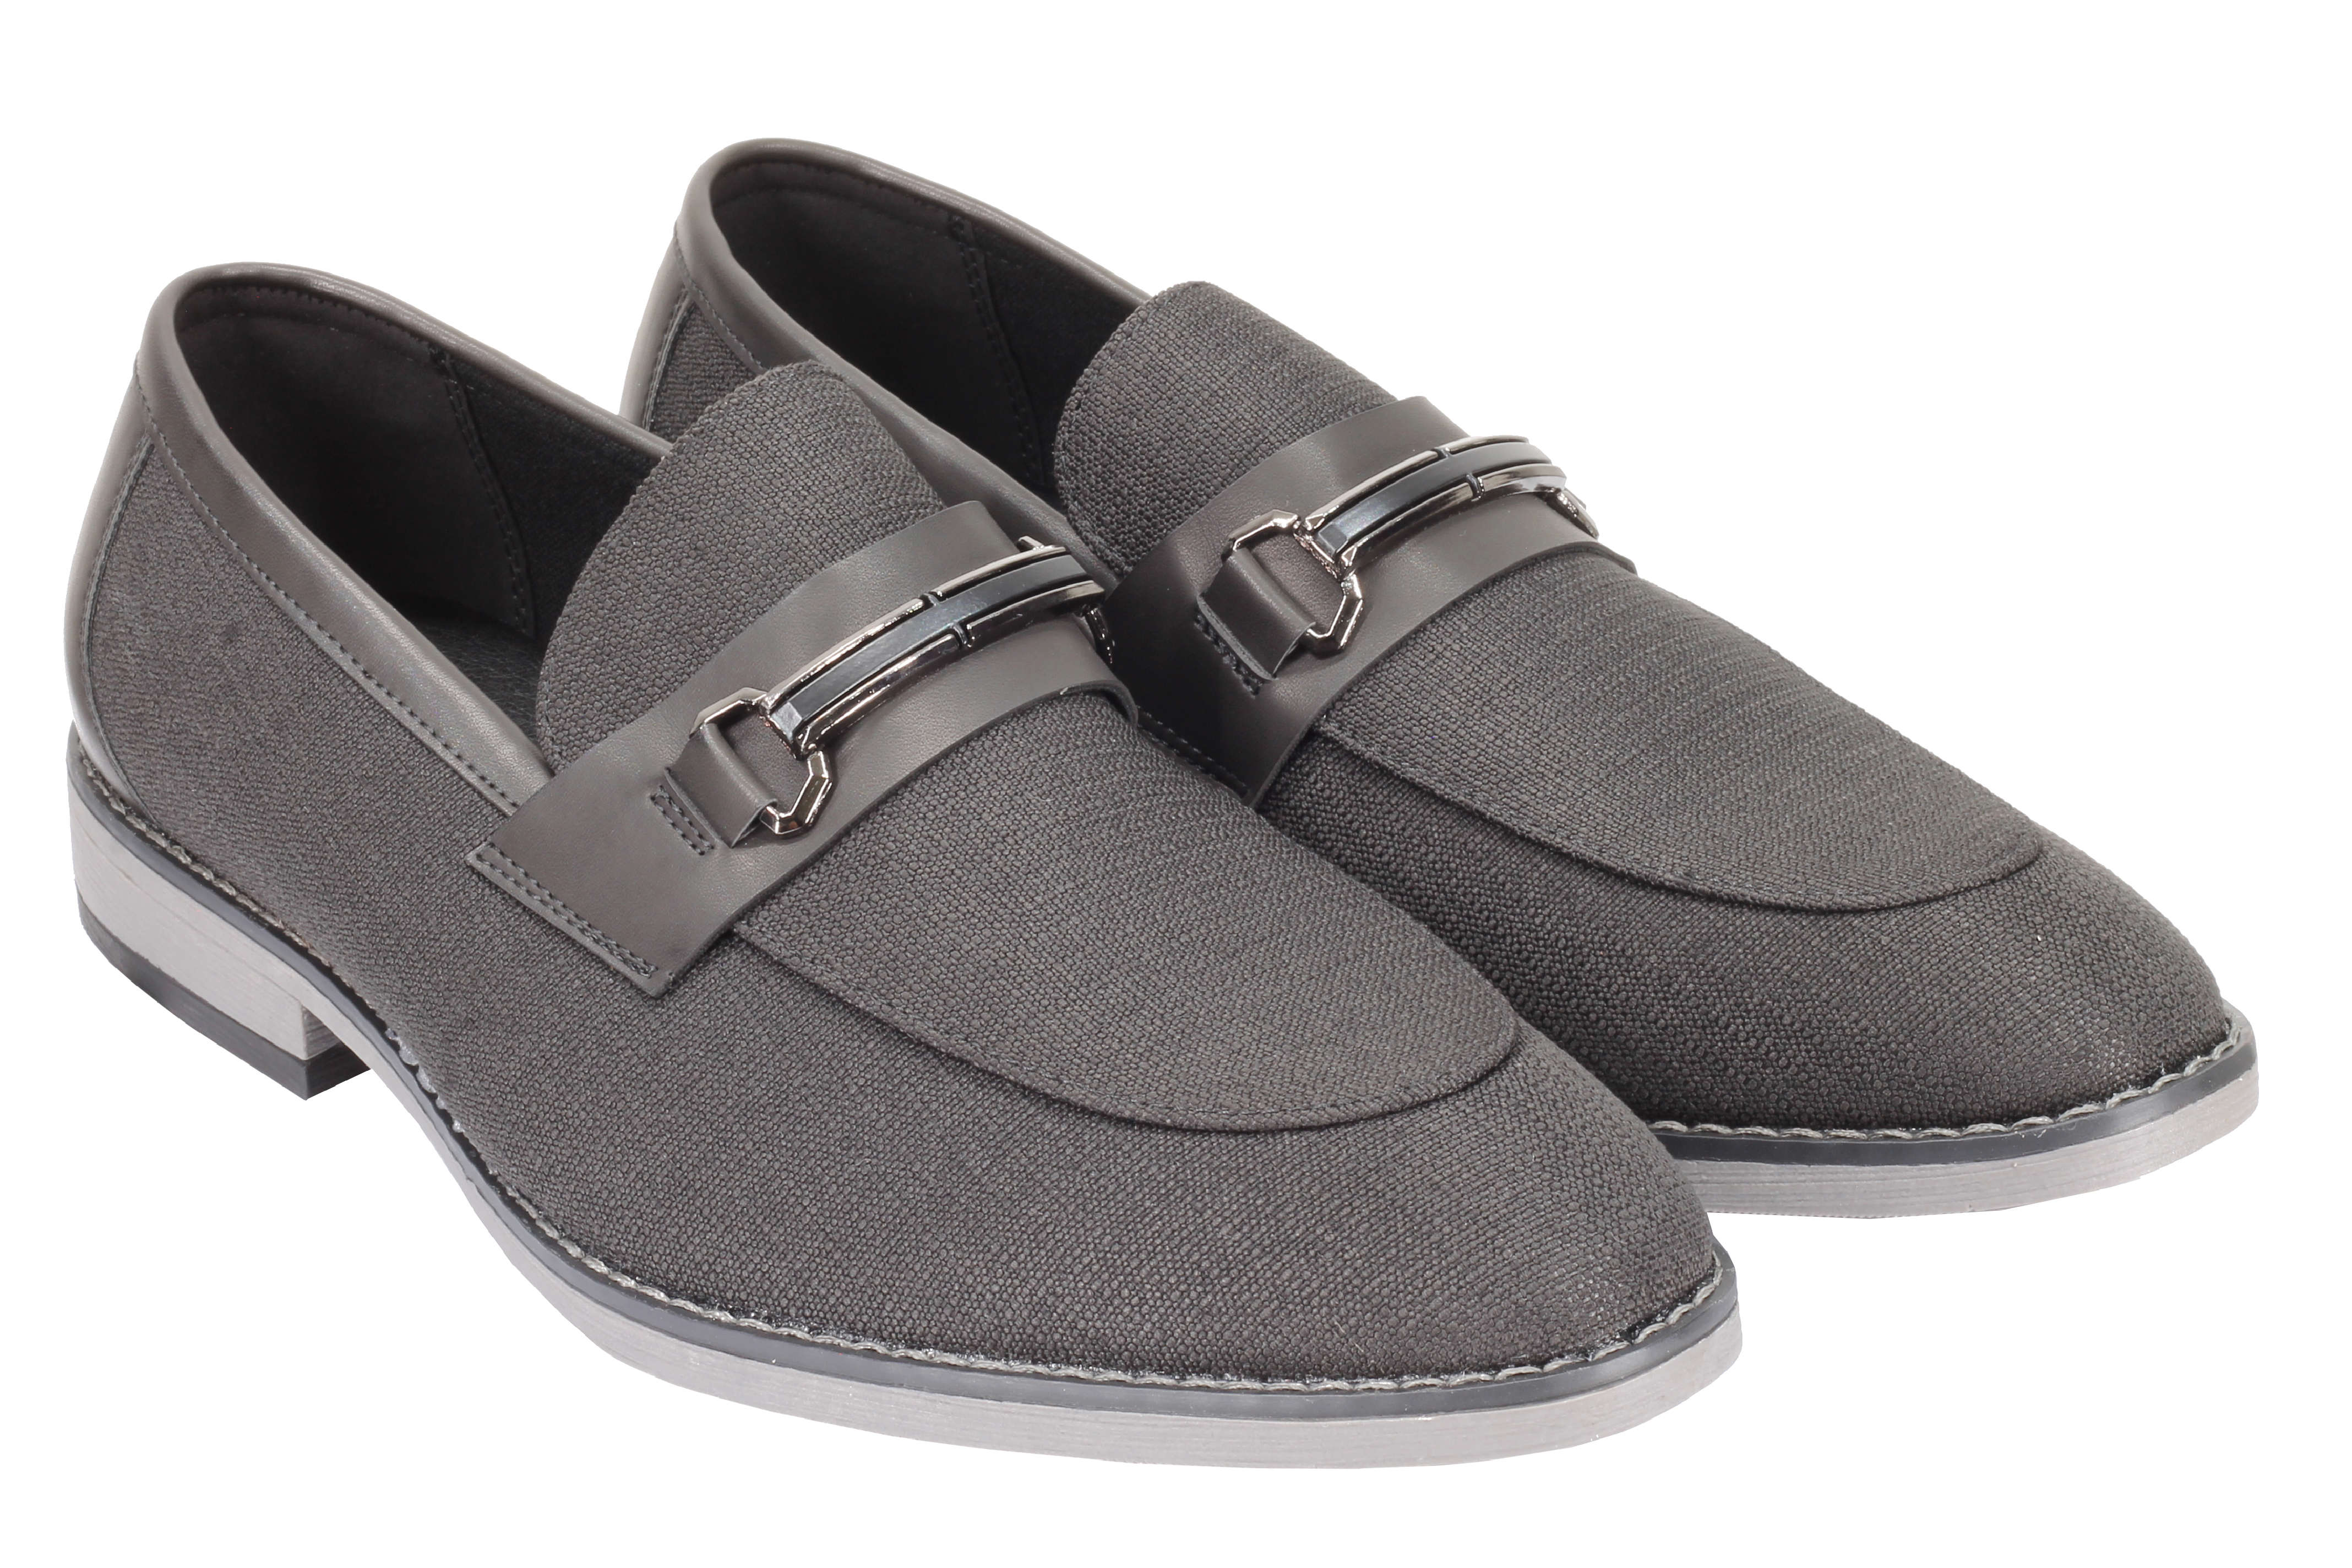 LINEN FABRIC LOAFERS WITH GOLD BUCKLE